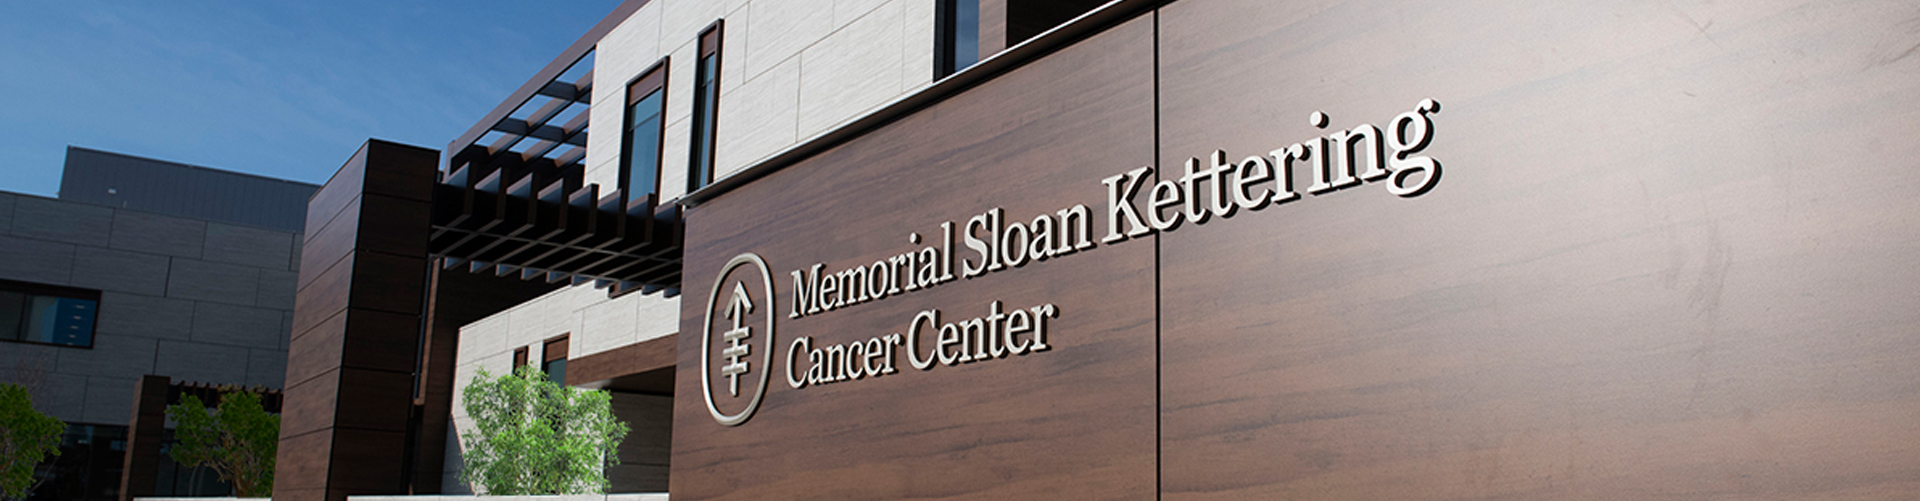 Memorial Sloan Kettering Cancer Center Audio Visual Conference Room